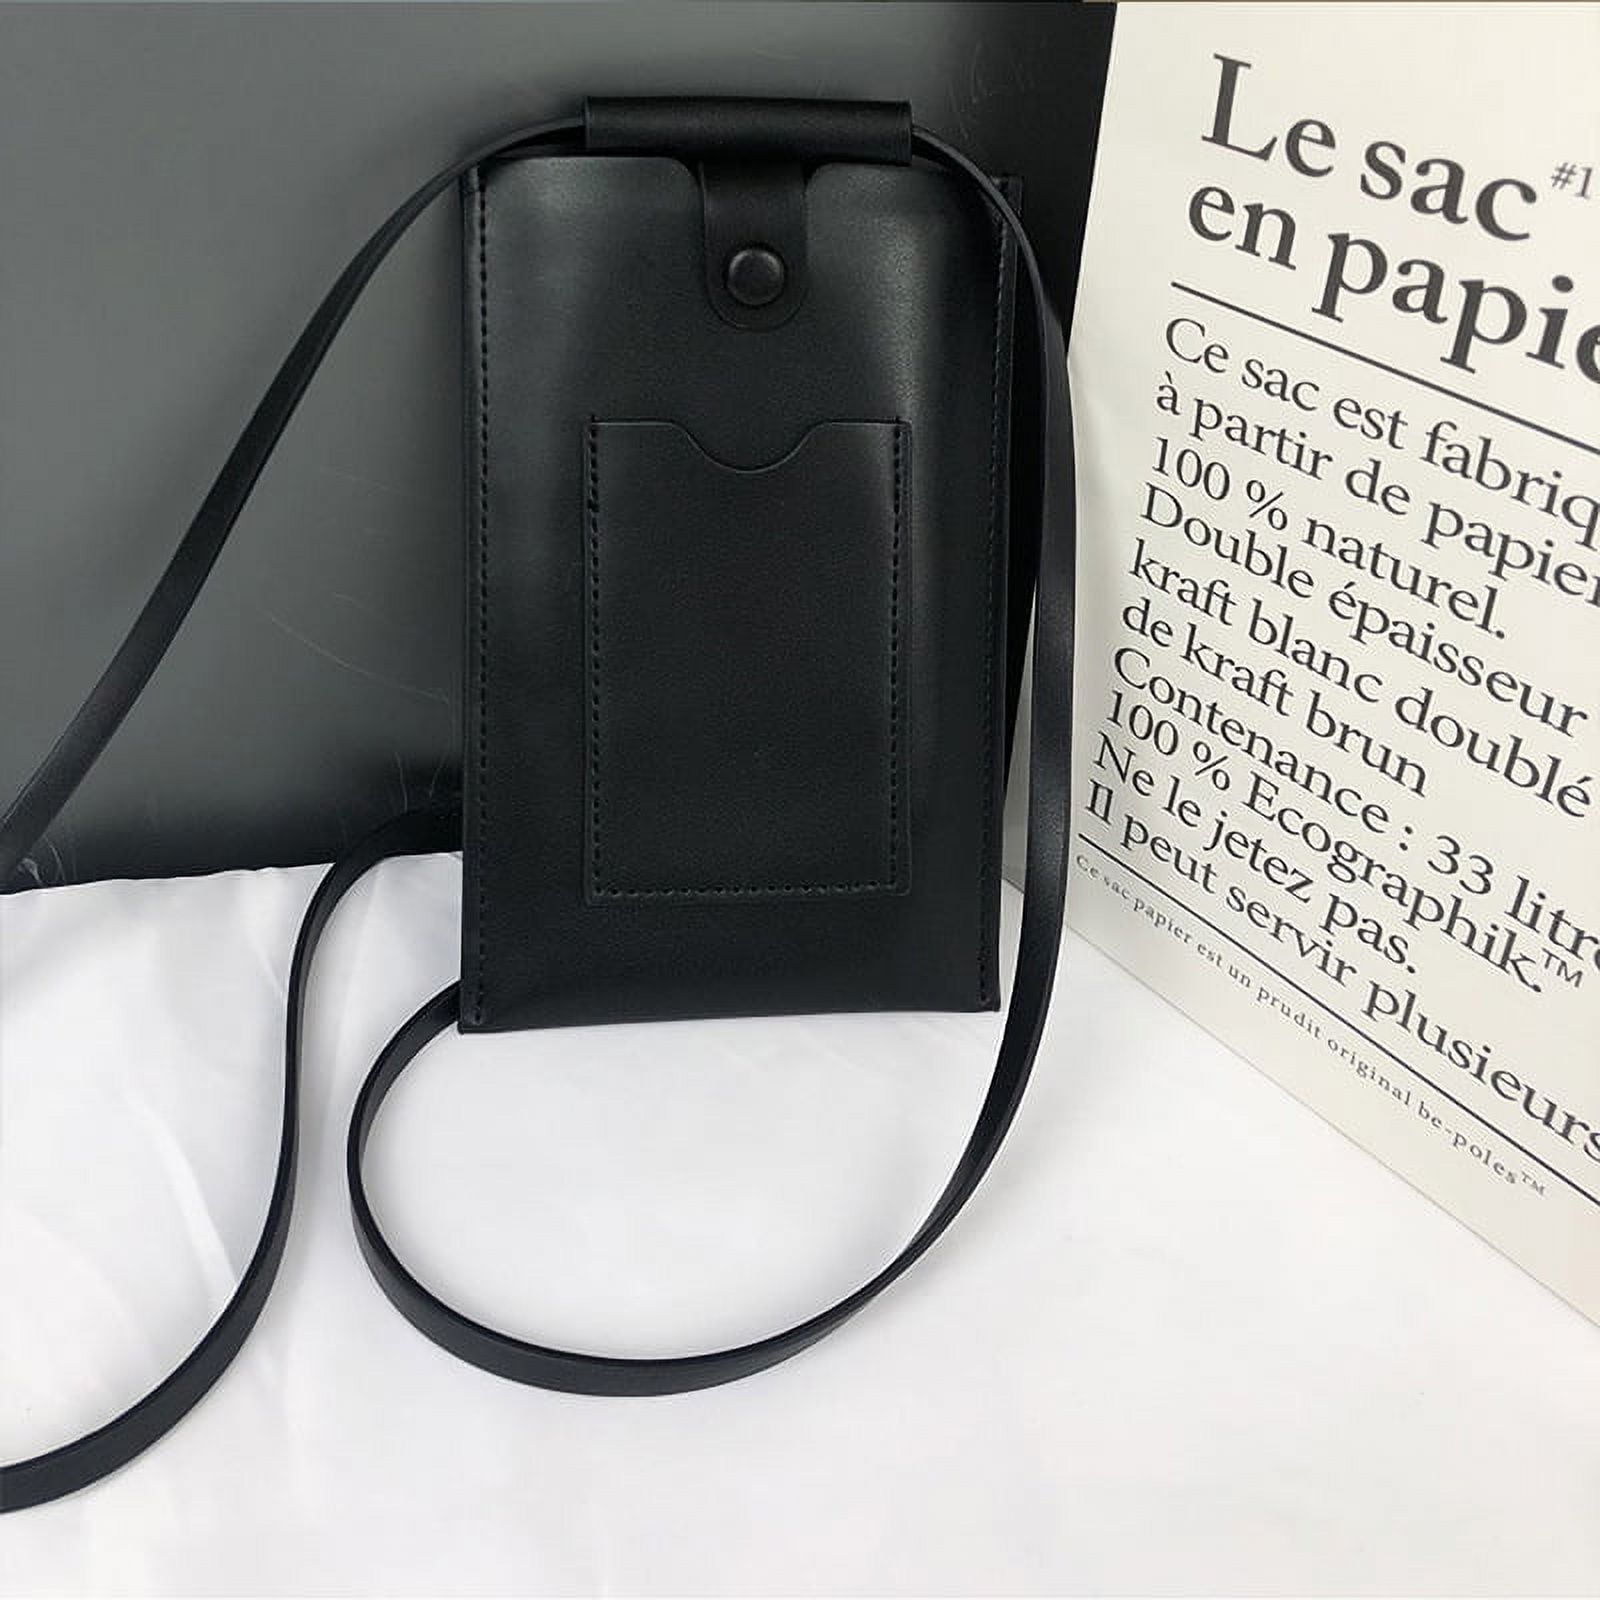 COS Leather Phone Pouch in Black